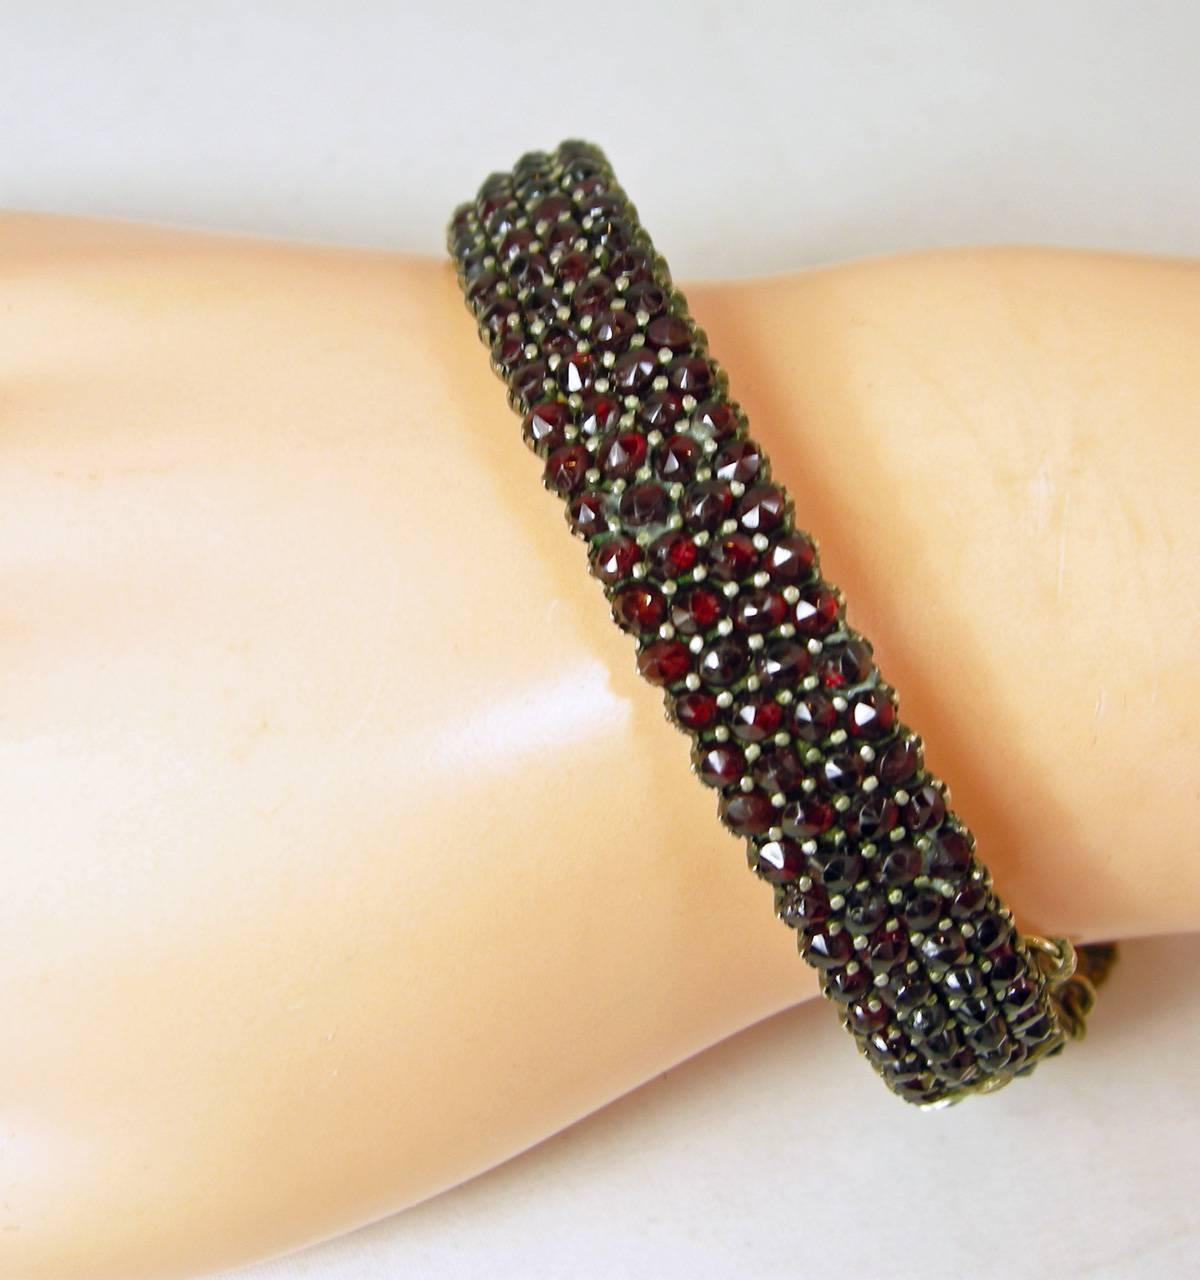 This vintage cuff bracelet has a pave of garnets that are prong set going around the entire bracelet. The bracelet is made of sterling silver over a gold vermeil. It has a slide in clasp with a safety chain. The bracelet measures 8” x 1/2” and is in